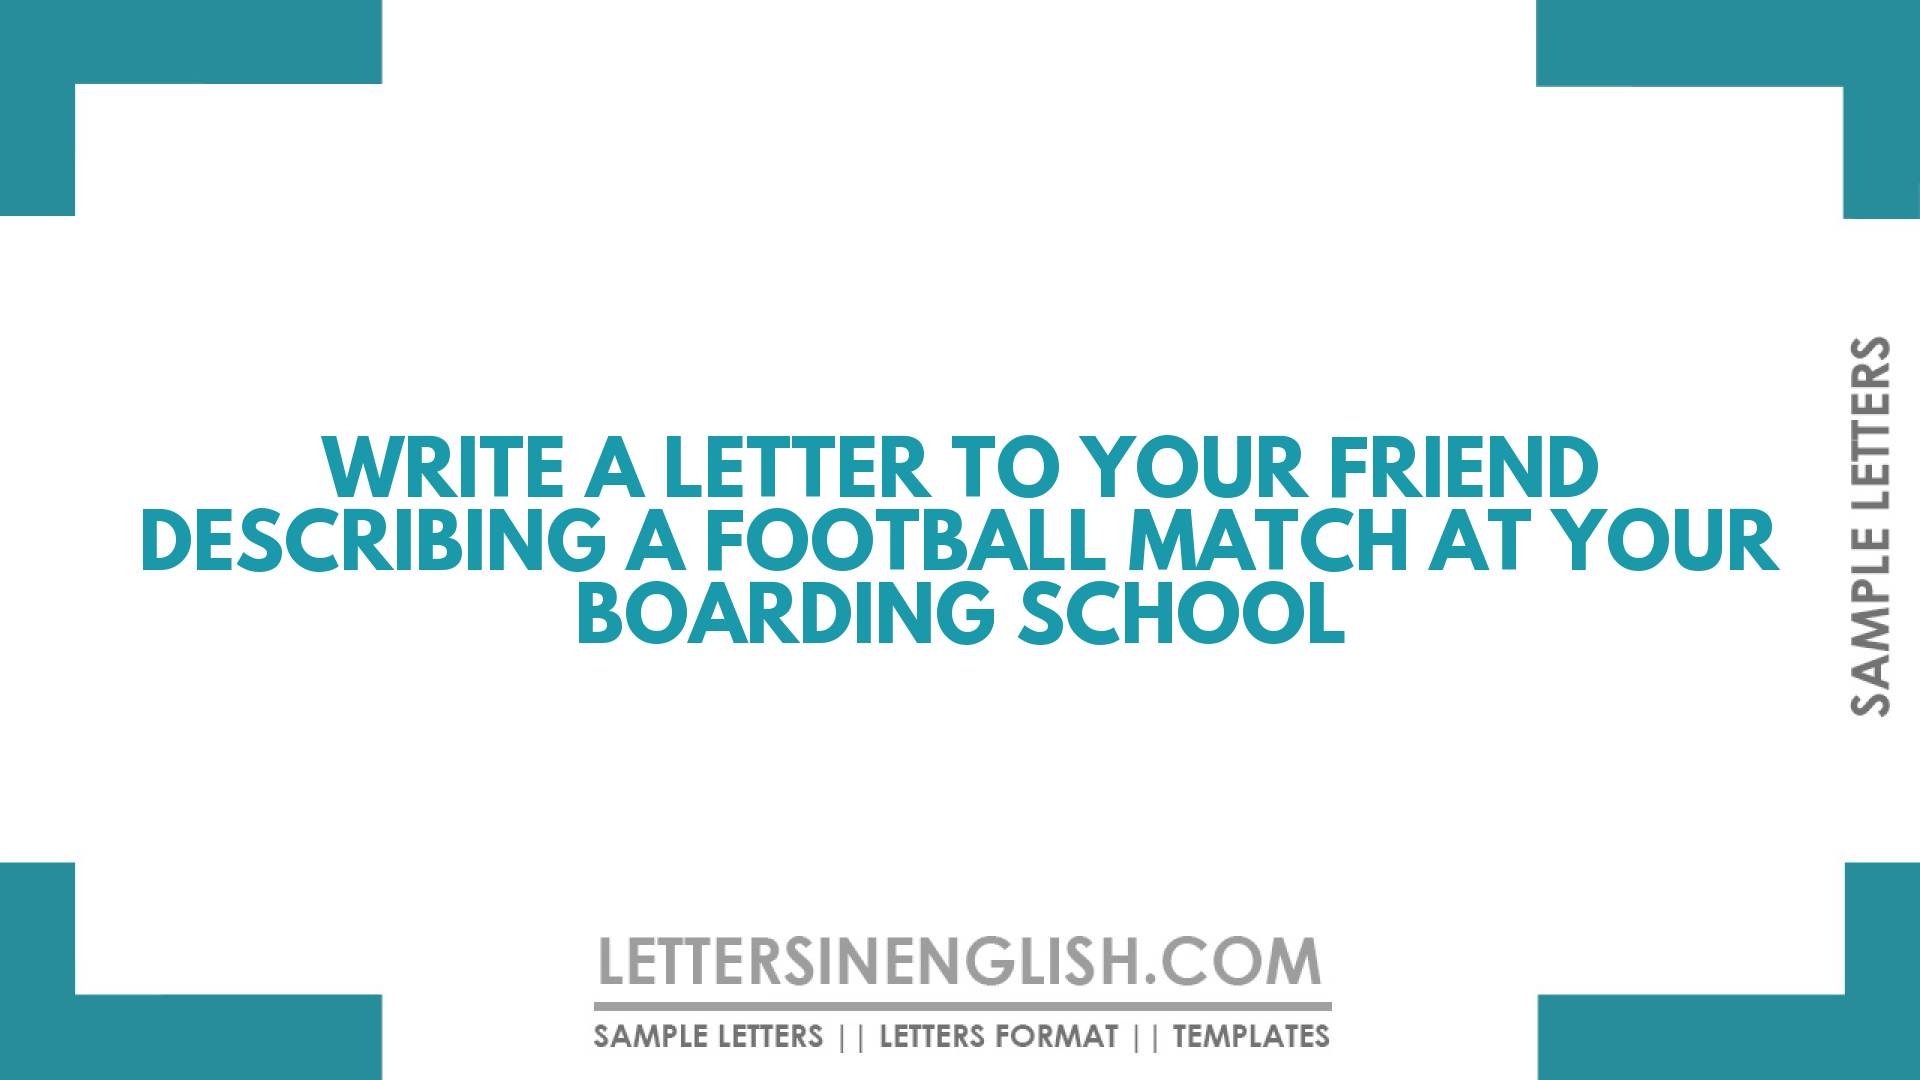 Write a Letter to Your Friend Describing a Football Match at Your Boarding School